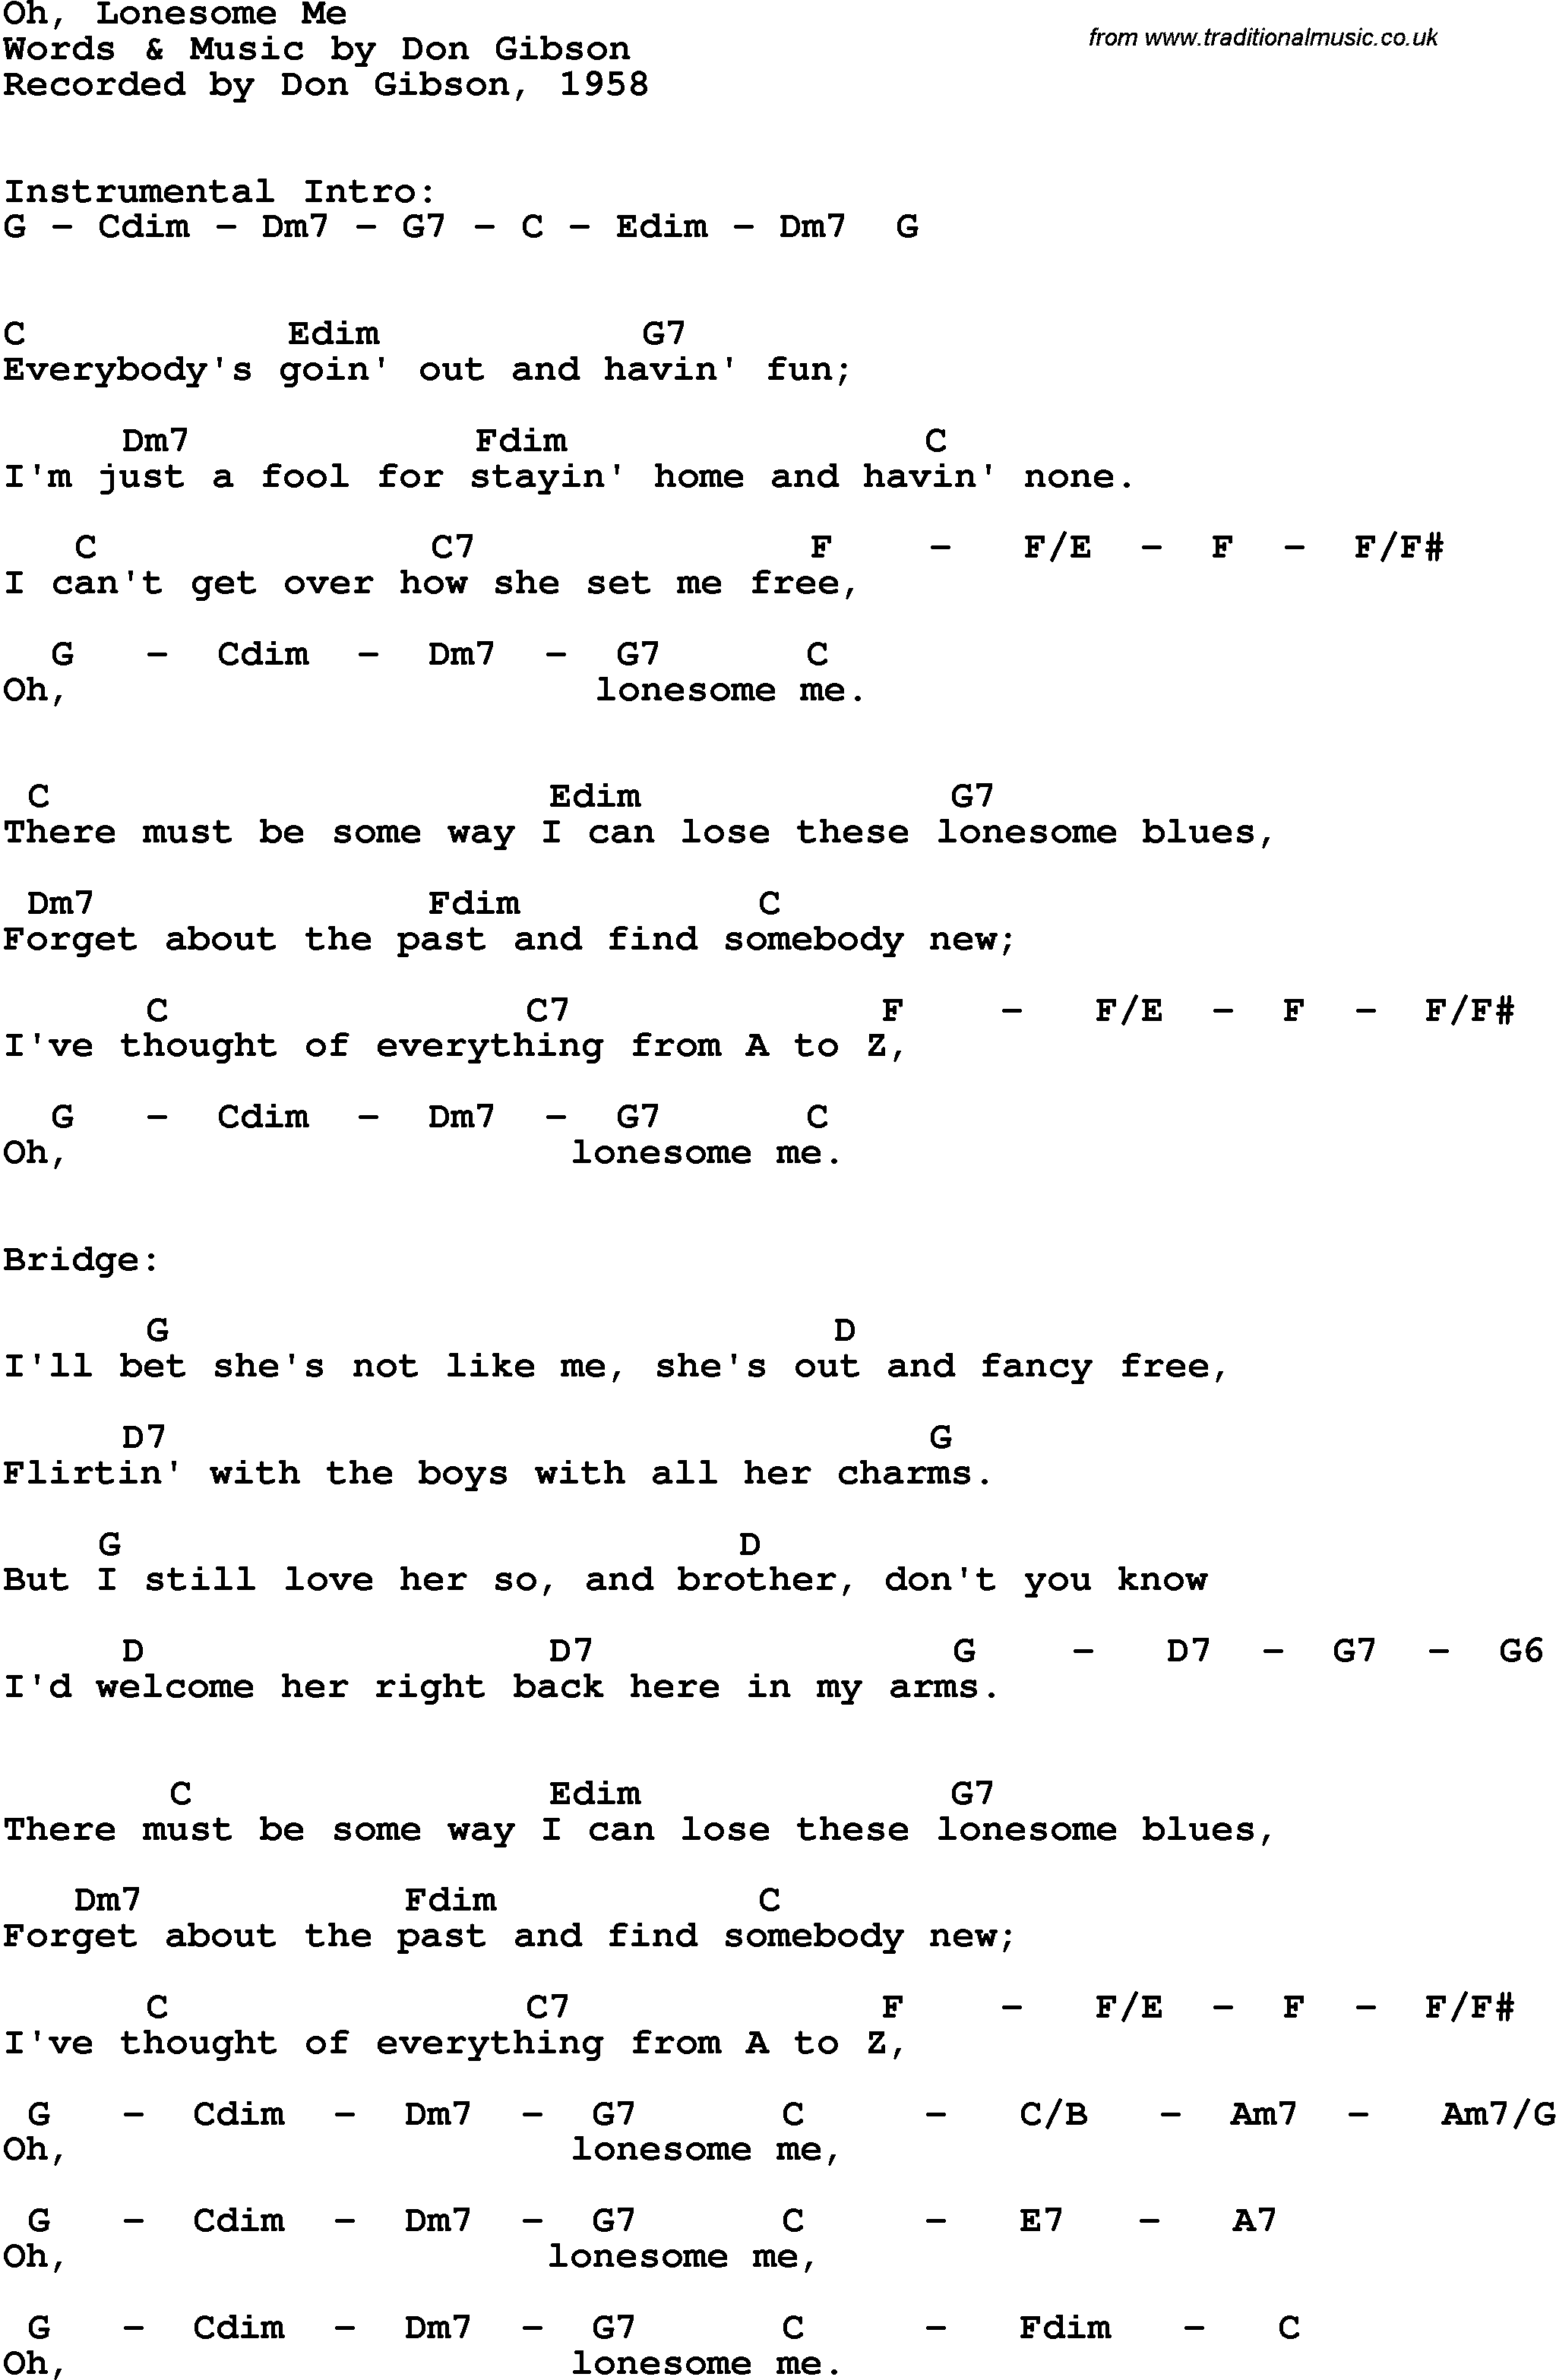 Song Lyrics with guitar chords for Oh, Lonesome Me - Don Gibson, 1958